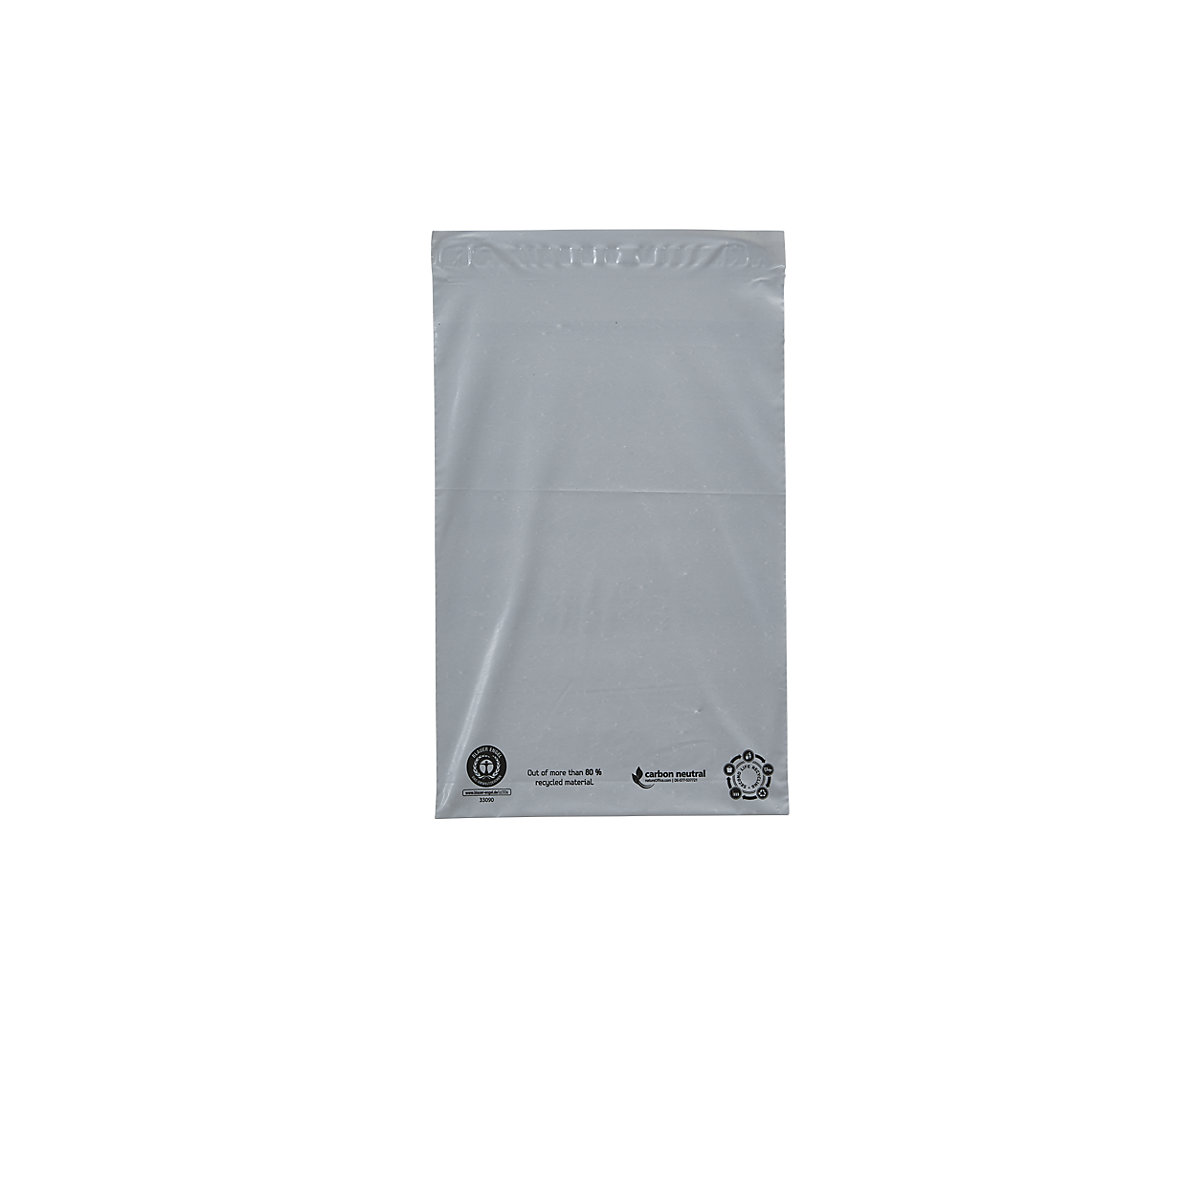 Dispatch bag, non-transparent, film thickness 60 µm, LxW 270 x 195 mm, pack of 1000-4